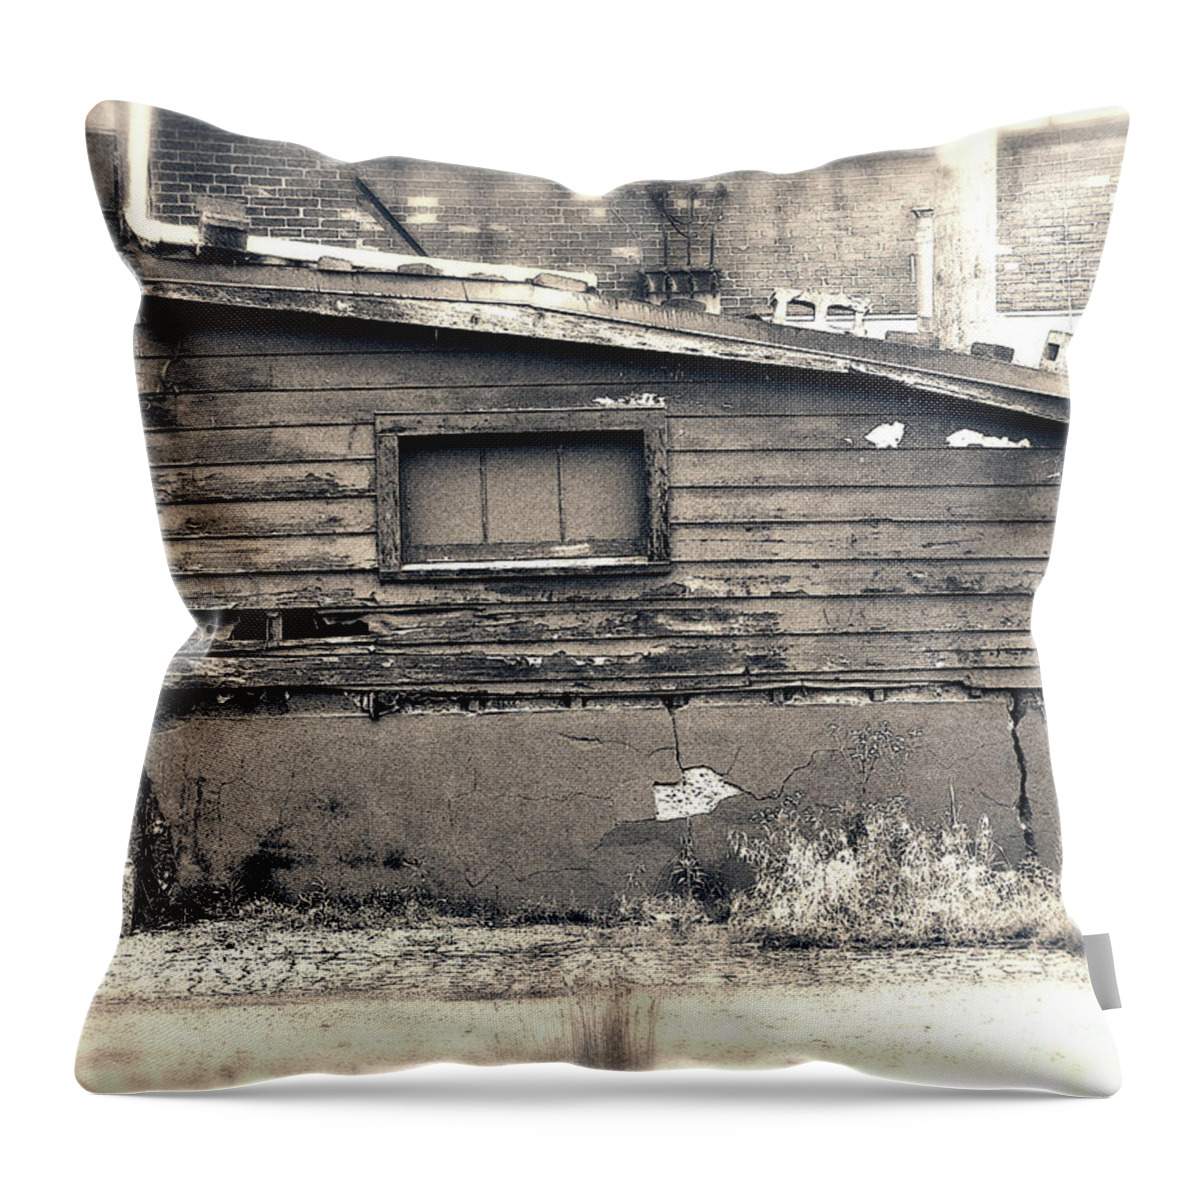 Shack Throw Pillow featuring the photograph Shabby Shack By The Tracks by Phil Perkins